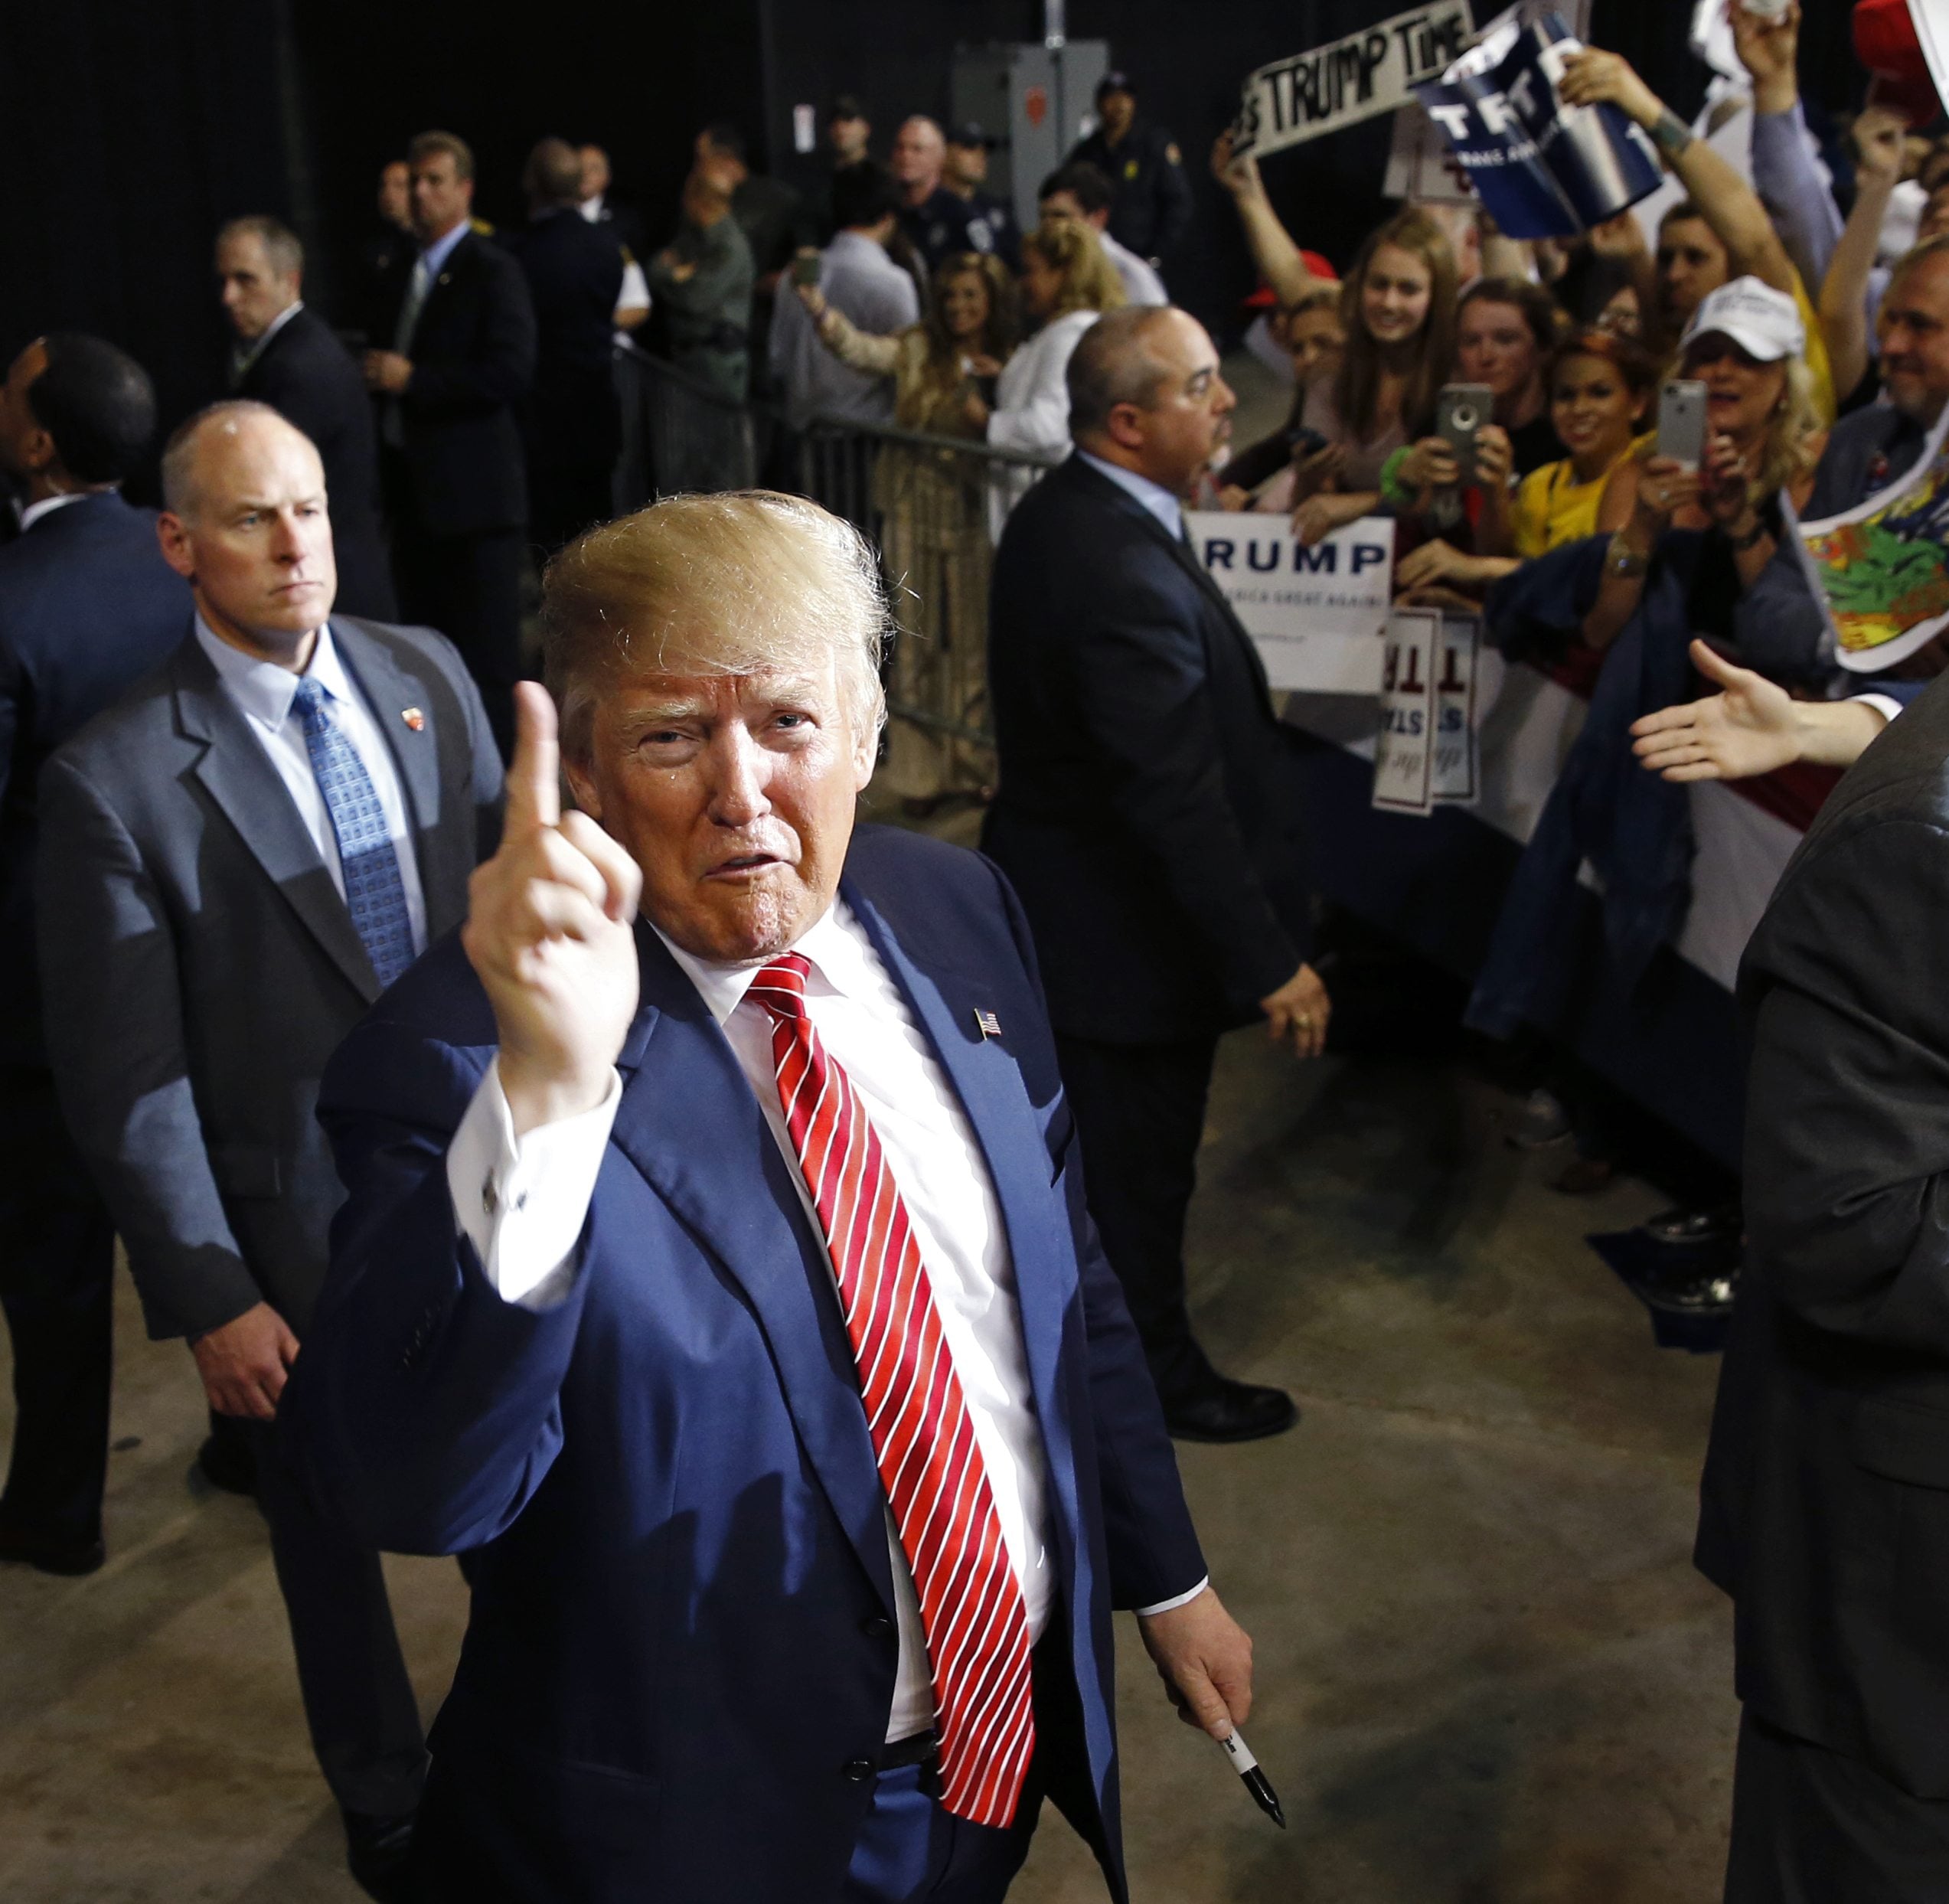 Republican presidential candidate Donald Trump thanks photographers as he greets the crowd after speaking at a campaign rally in Baton Rouge, La., Thursday, Feb. 11, 2016.